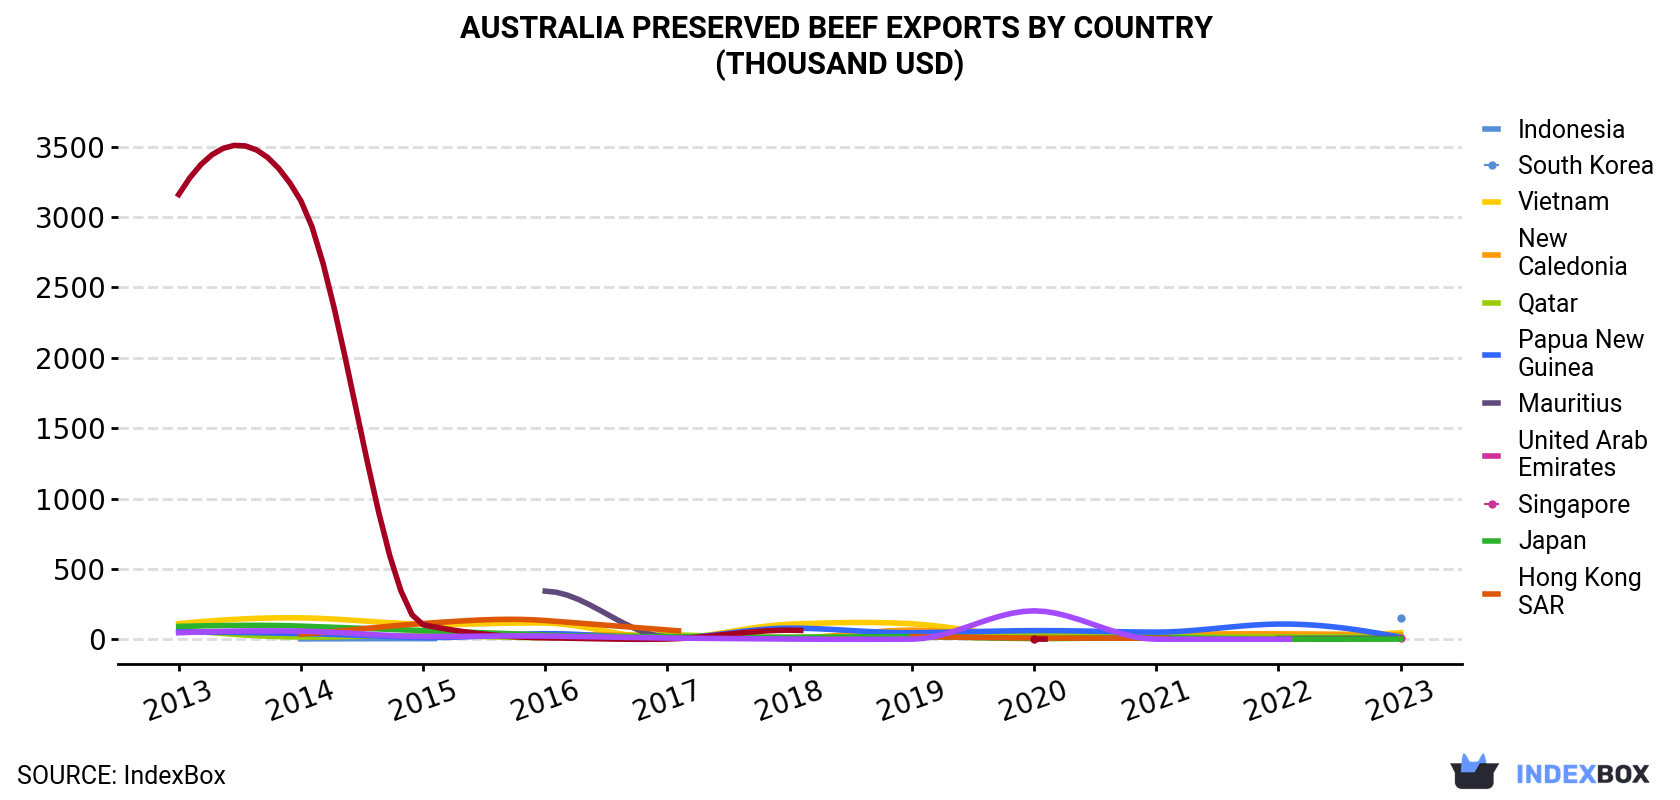 Australia Preserved Beef Exports By Country (Thousand USD)